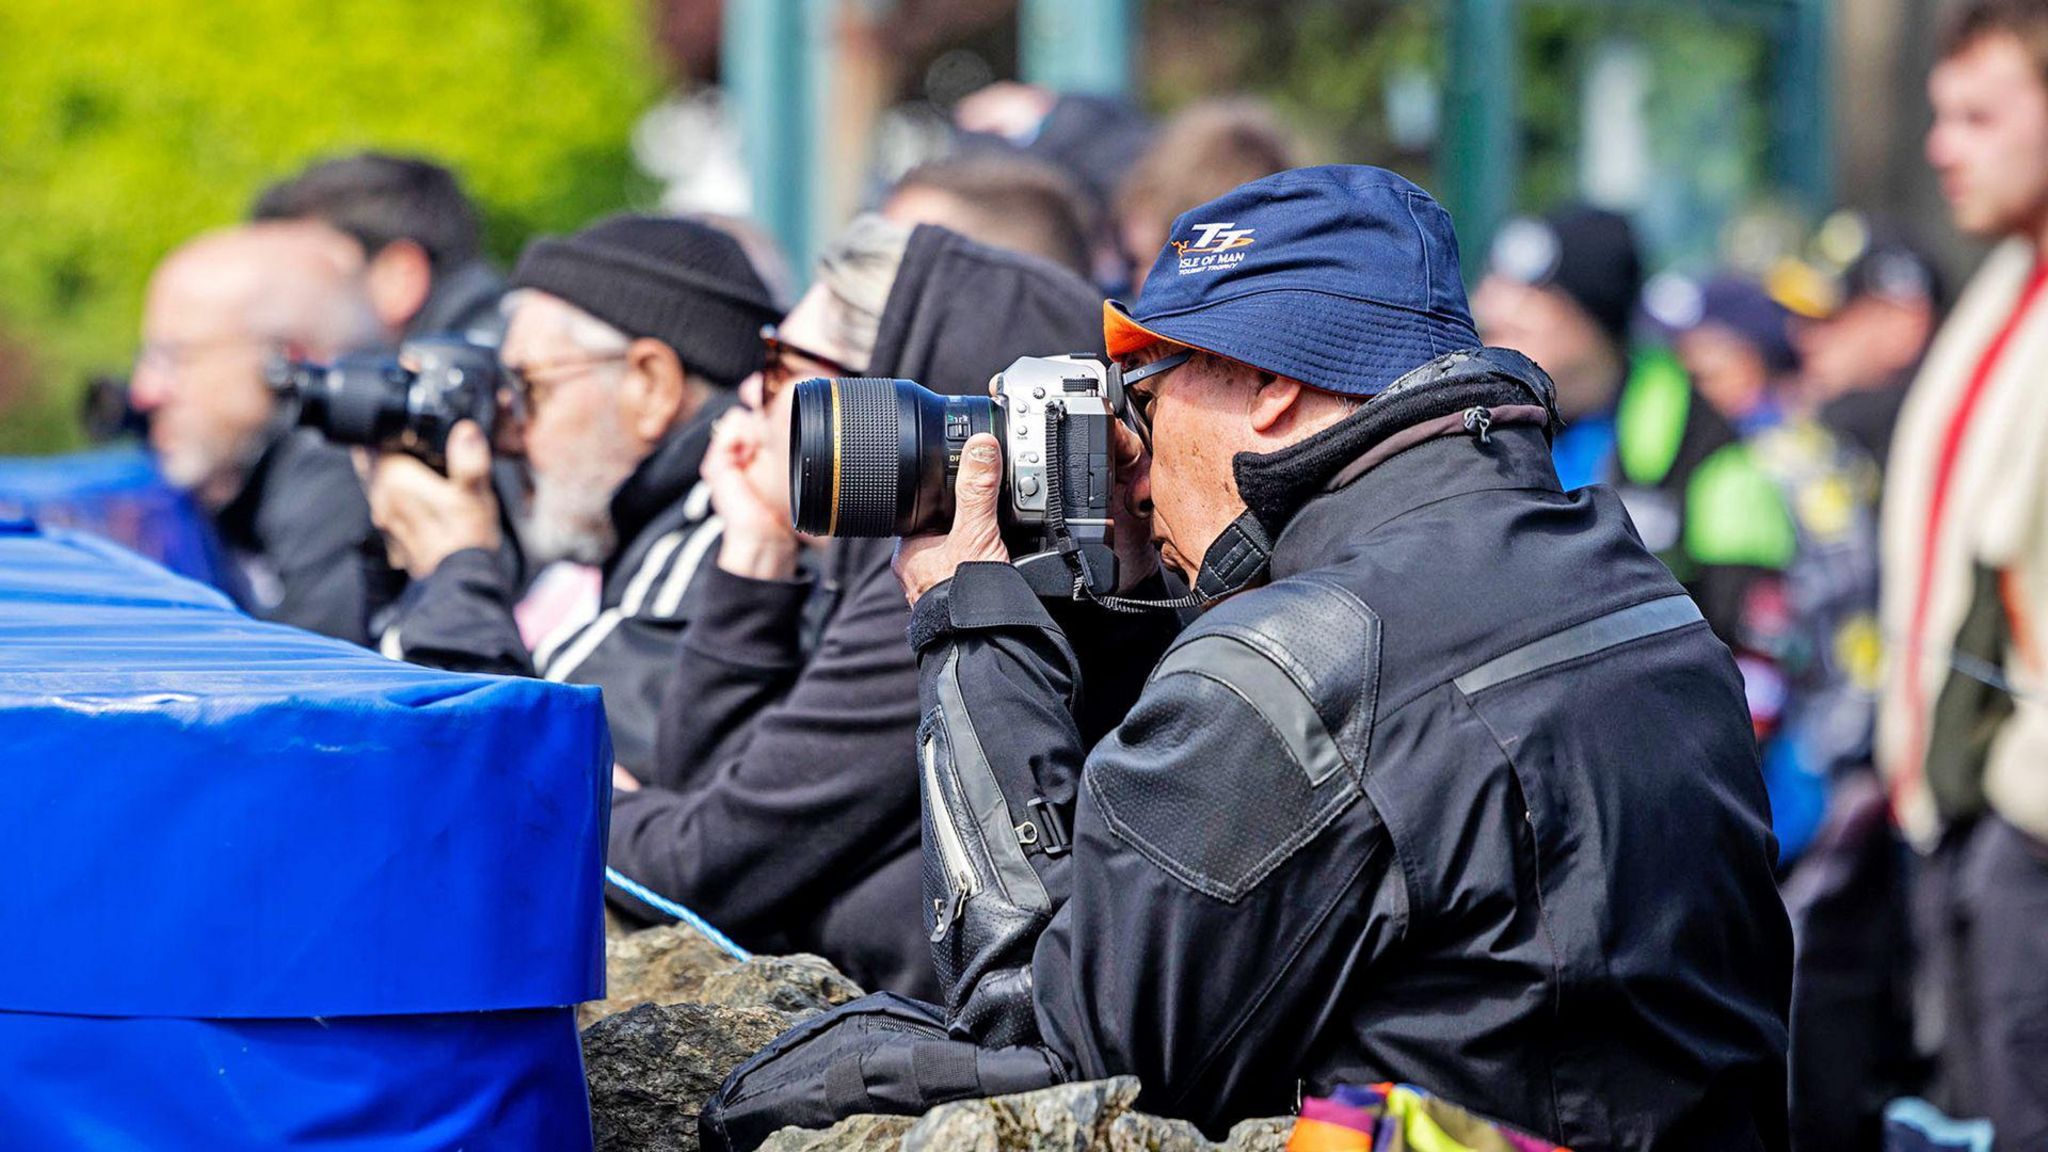 People with cameras pointed ahead sitting behind a barrier